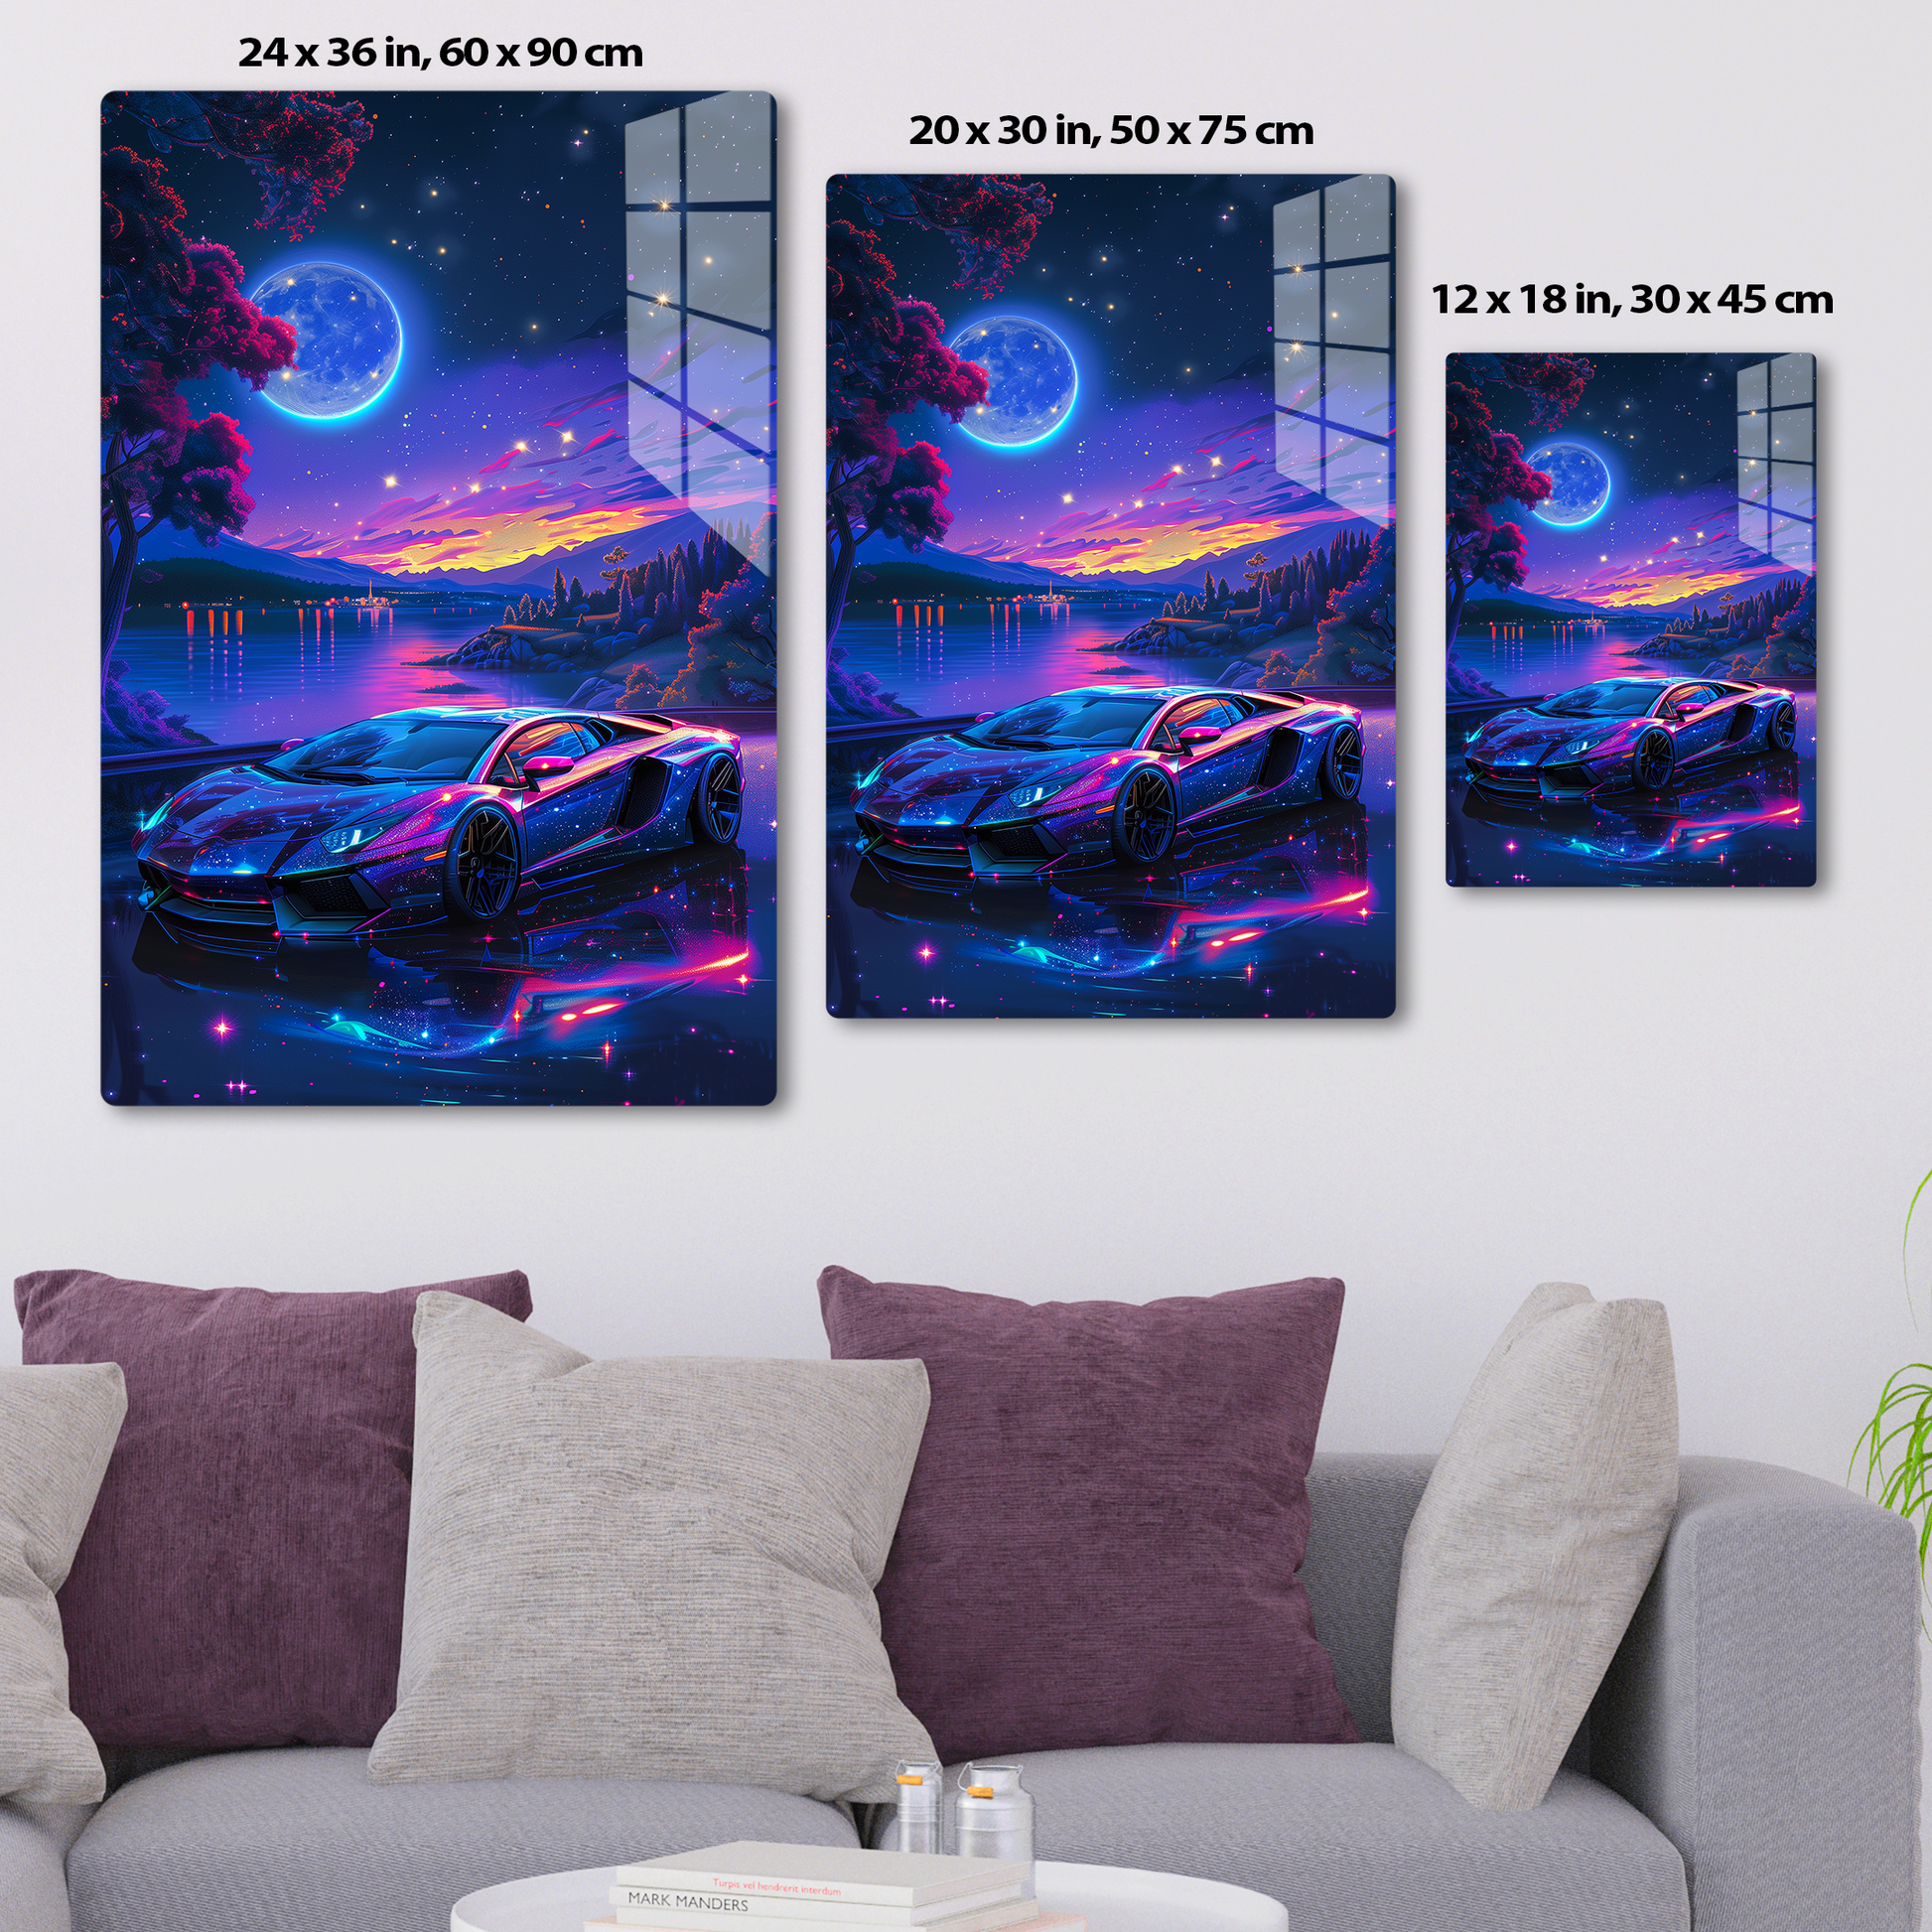 Cosmic Cruise (Acrylic)Embrace sophistication with 'Cosmic Cruise' in acrylic from RimaGallery. Modern elegance meets durability for art lovers. Free US shipping. Shop now!RimaGallery